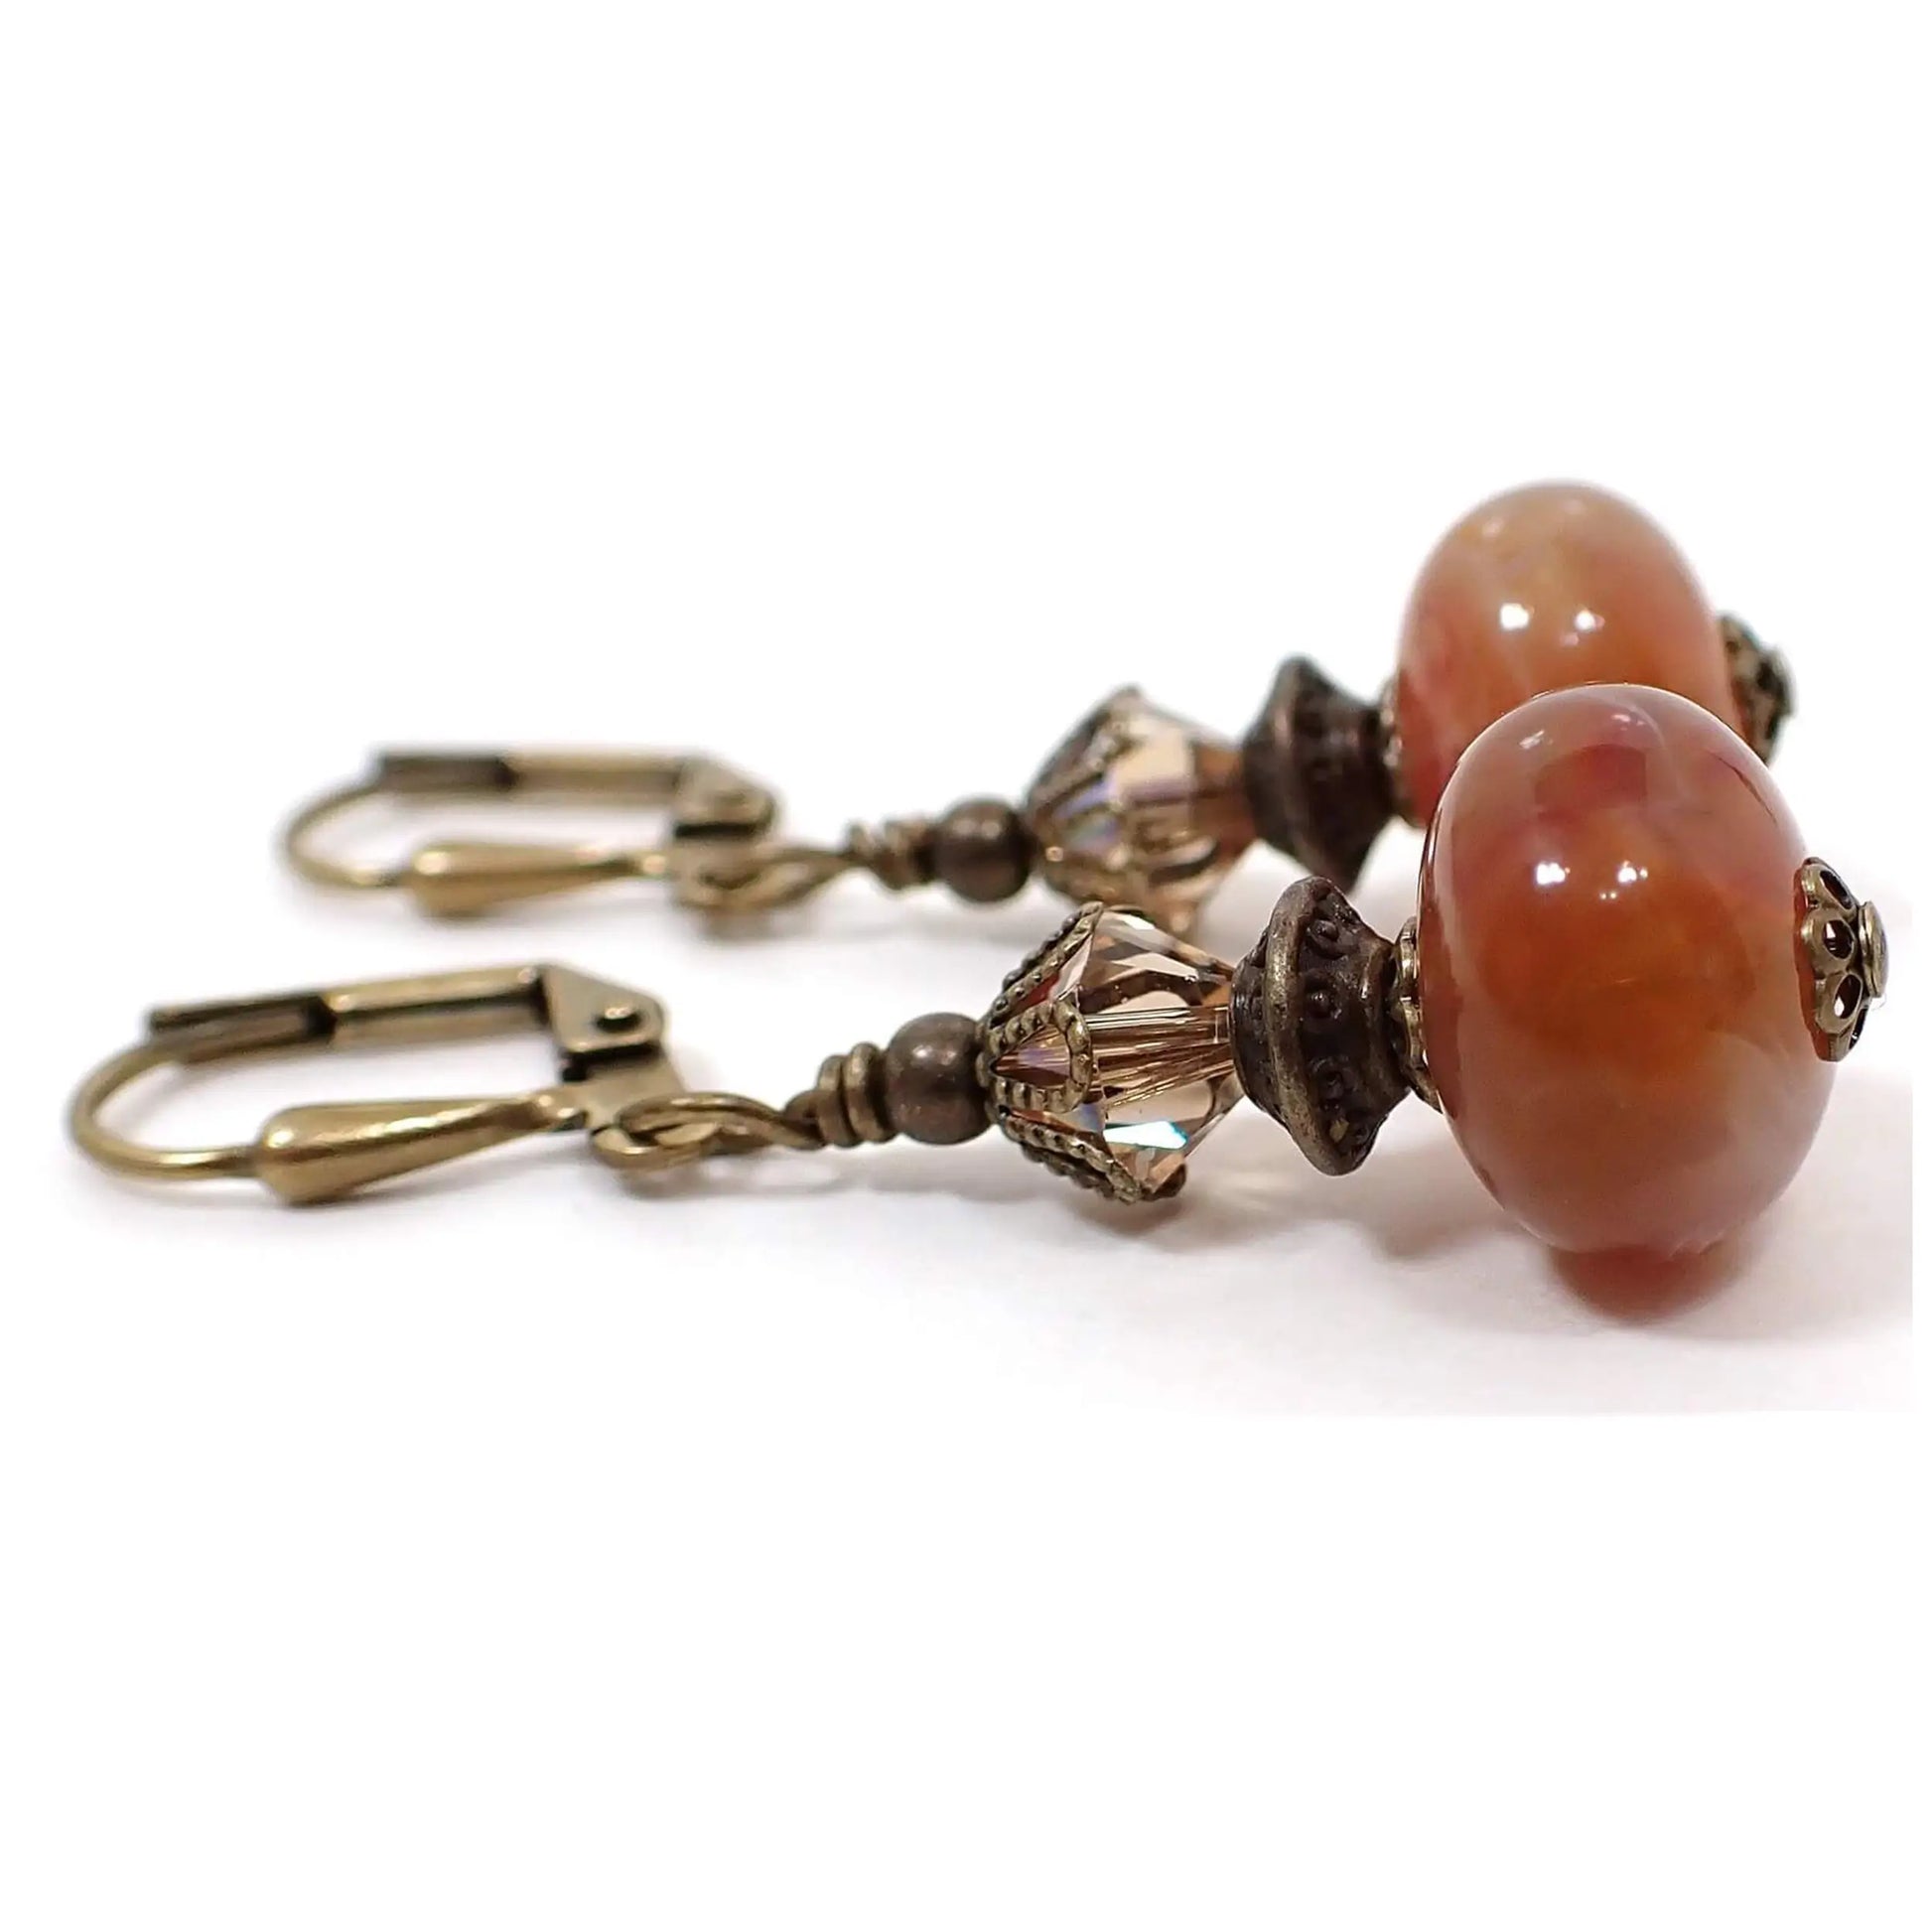 Side view of the handmade vintage lucite drop earrings. They have antiqued brass metal with faceted glass crystal beads at the top. The bottom lucite beads are rondelle shaped with marbled swirls of pink, orange, and white.